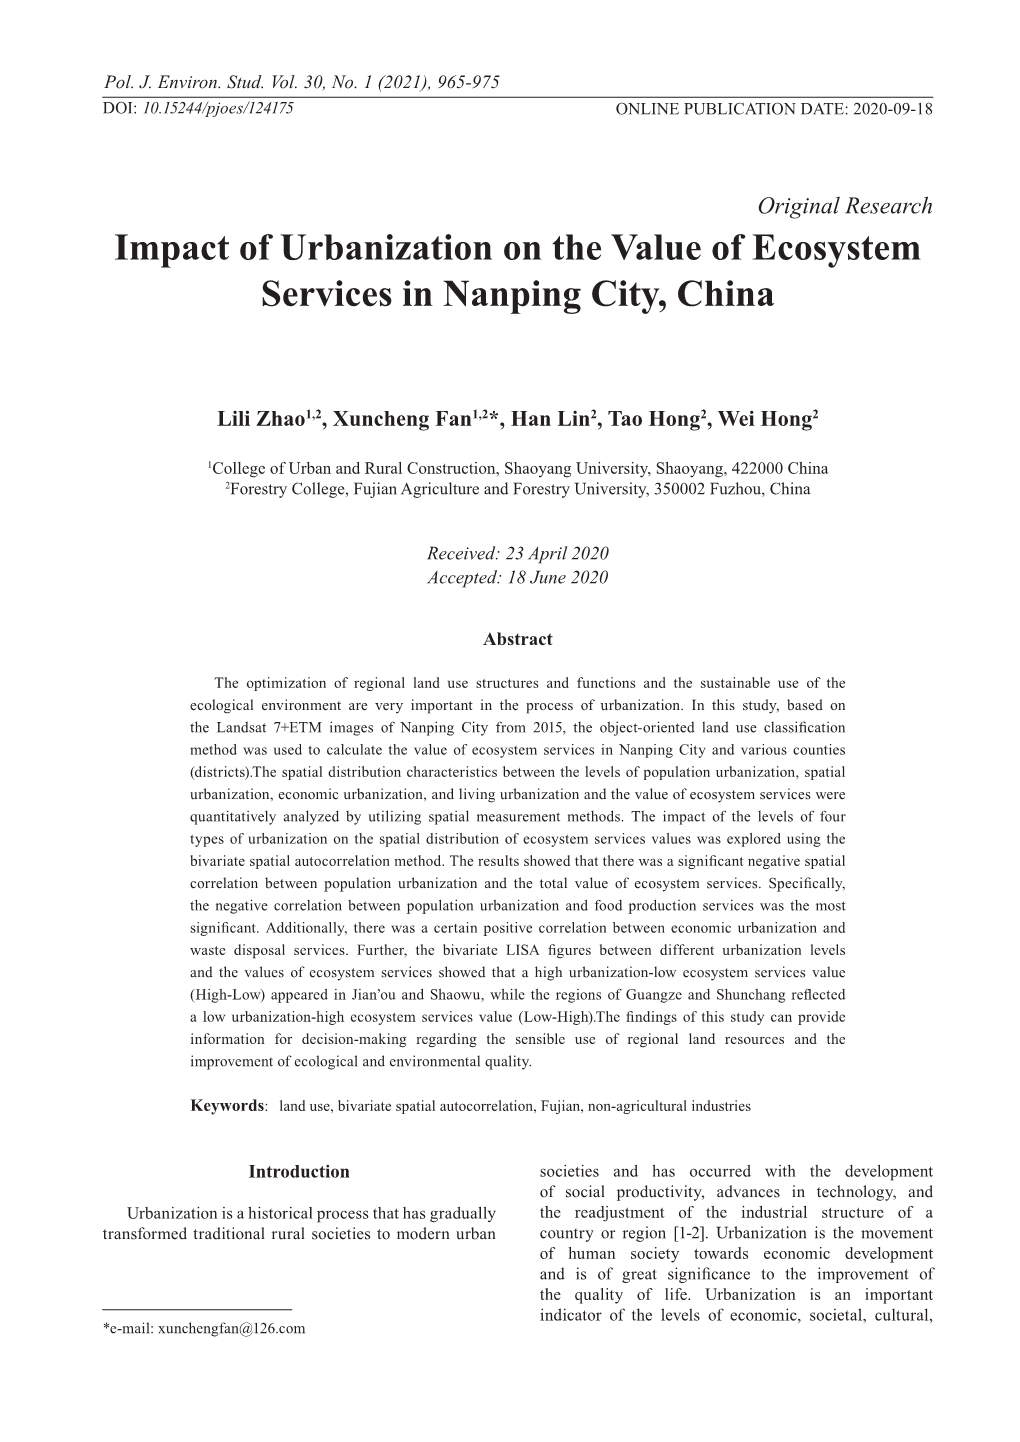 Impact of Urbanization on the Value of Ecosystem Services in Nanping City, China